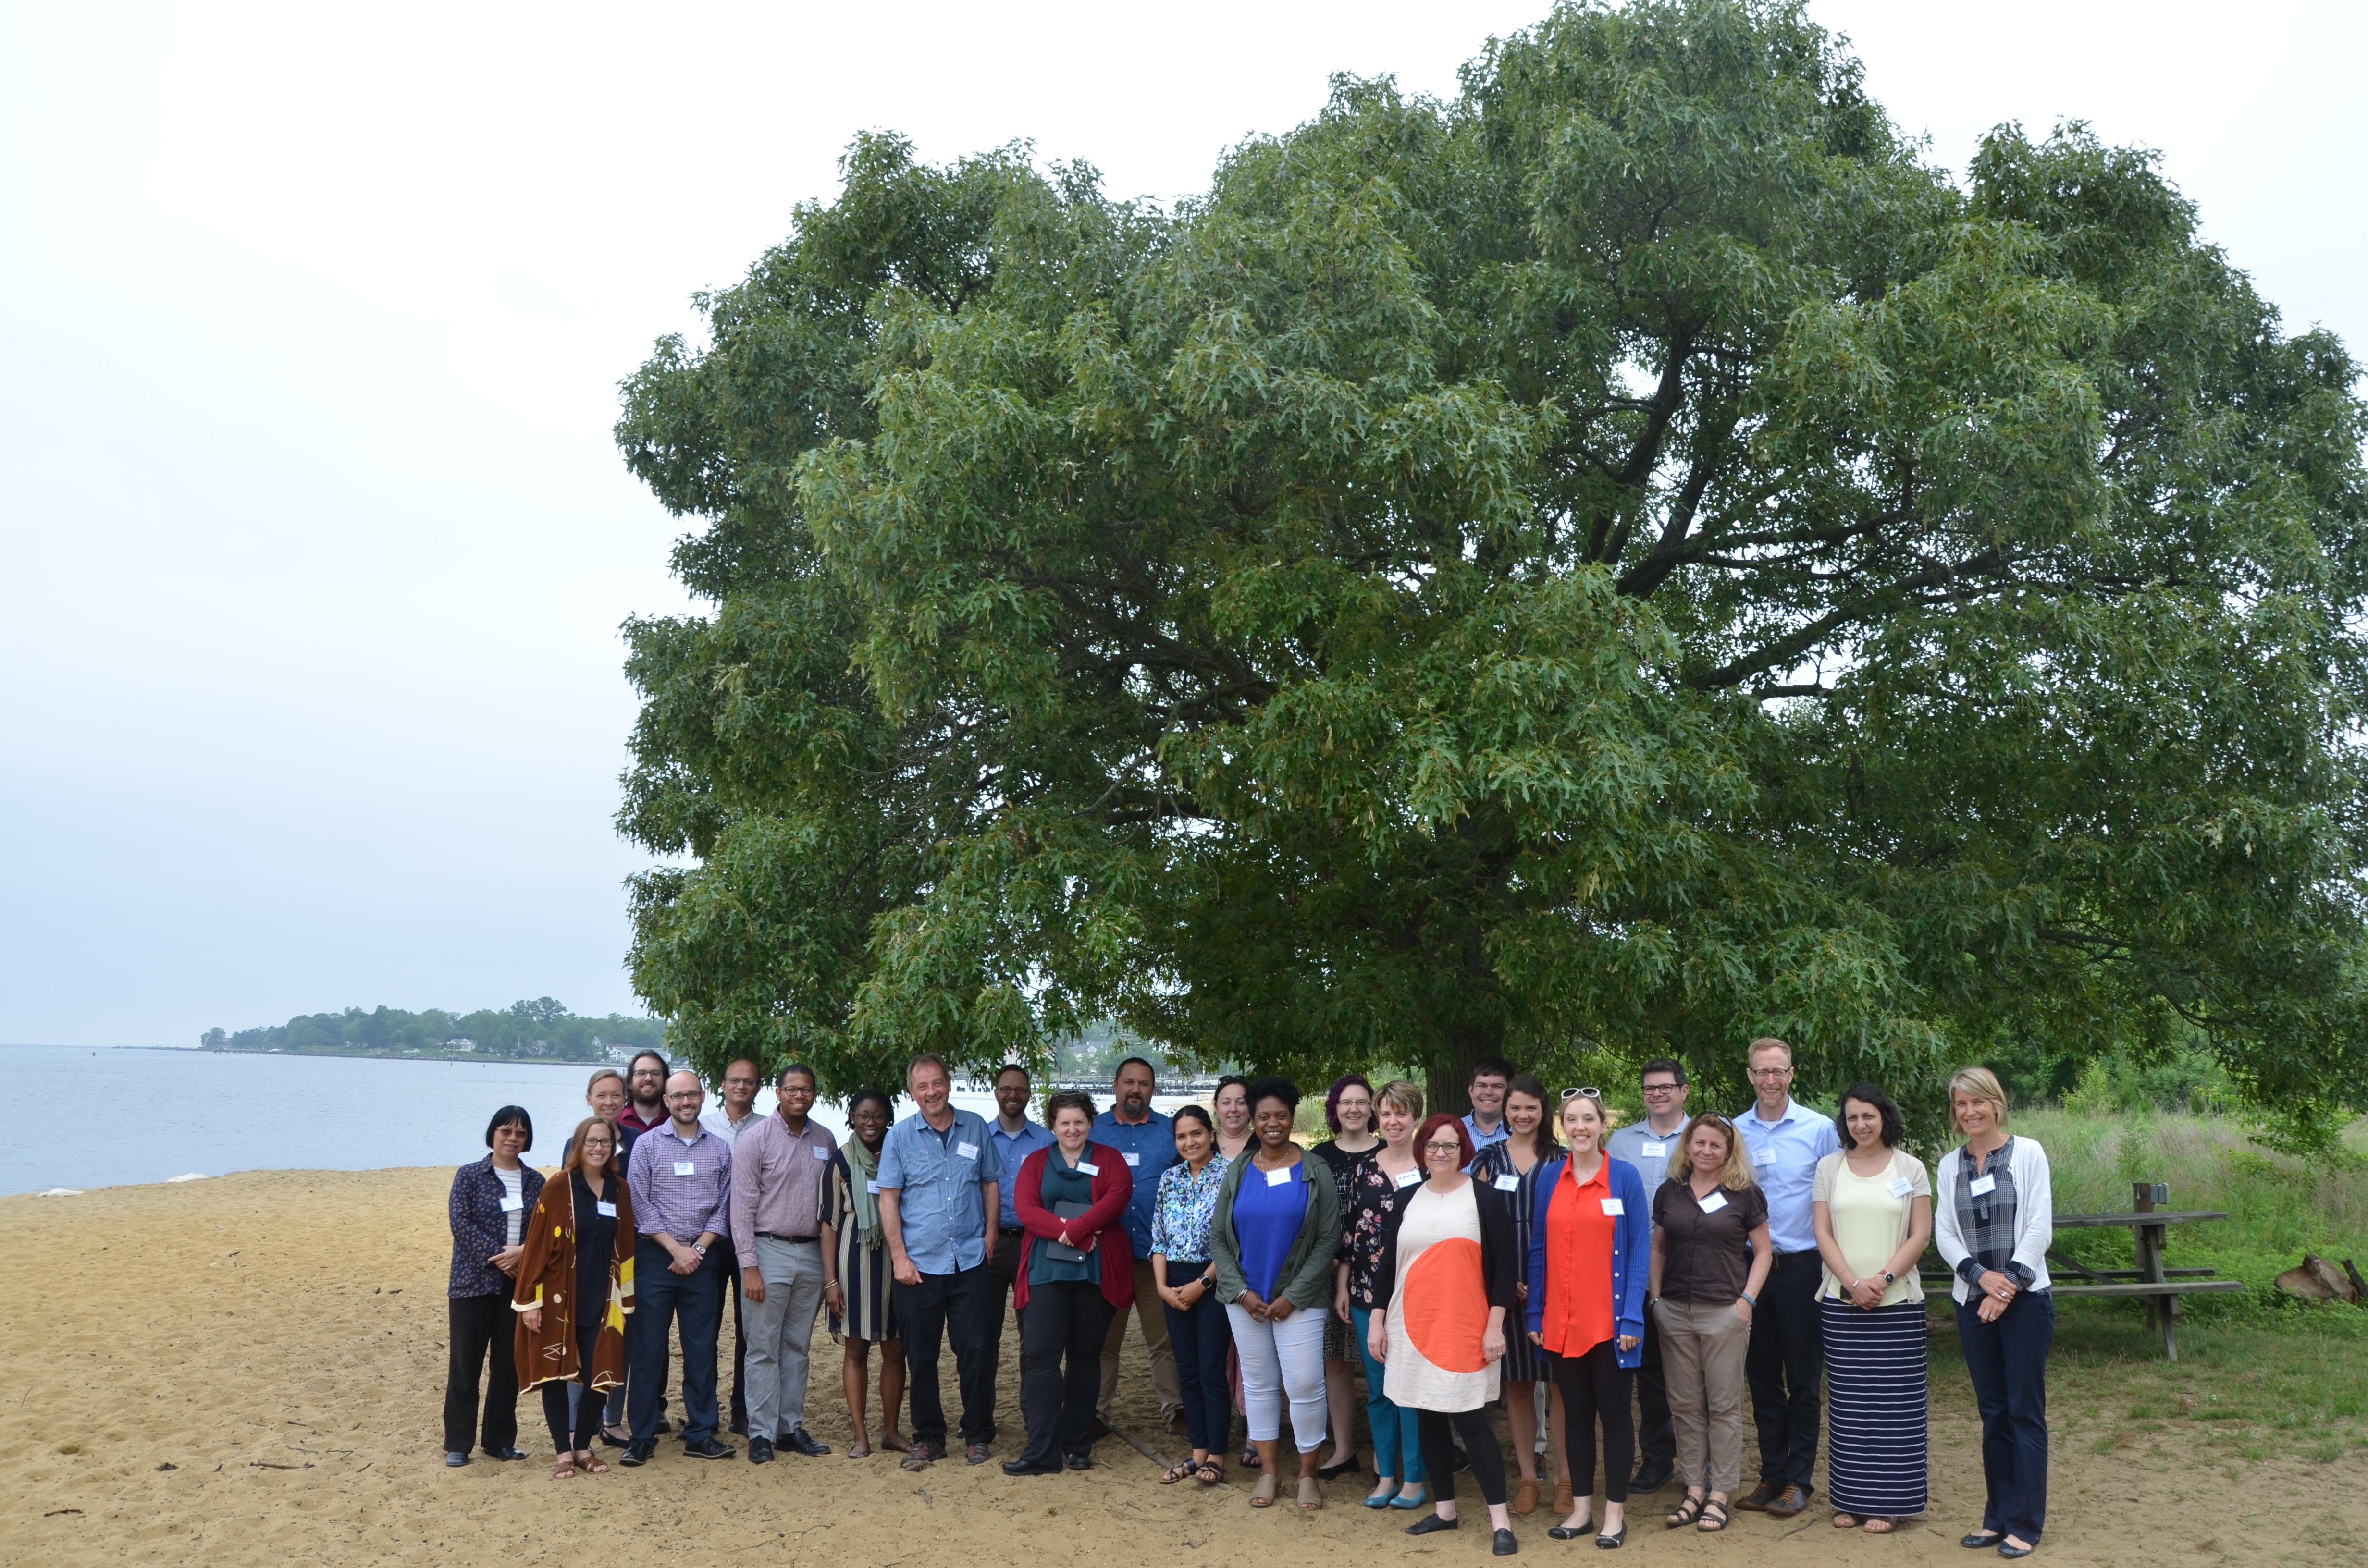 Teaching Fellows outdoors by the bay and large tree